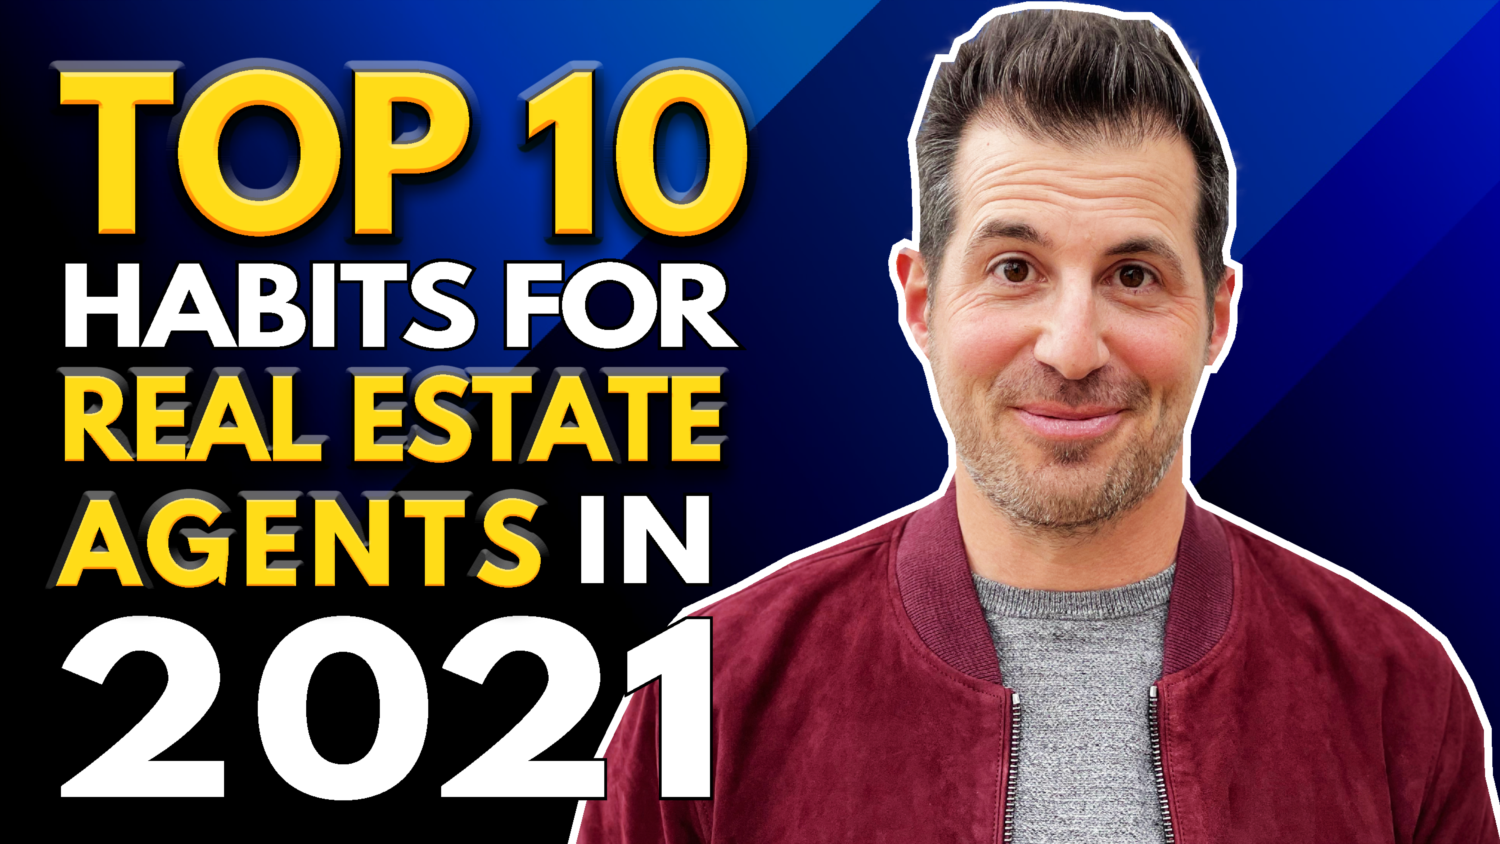 top-10-habits-for-real-estate-agents-in-2021